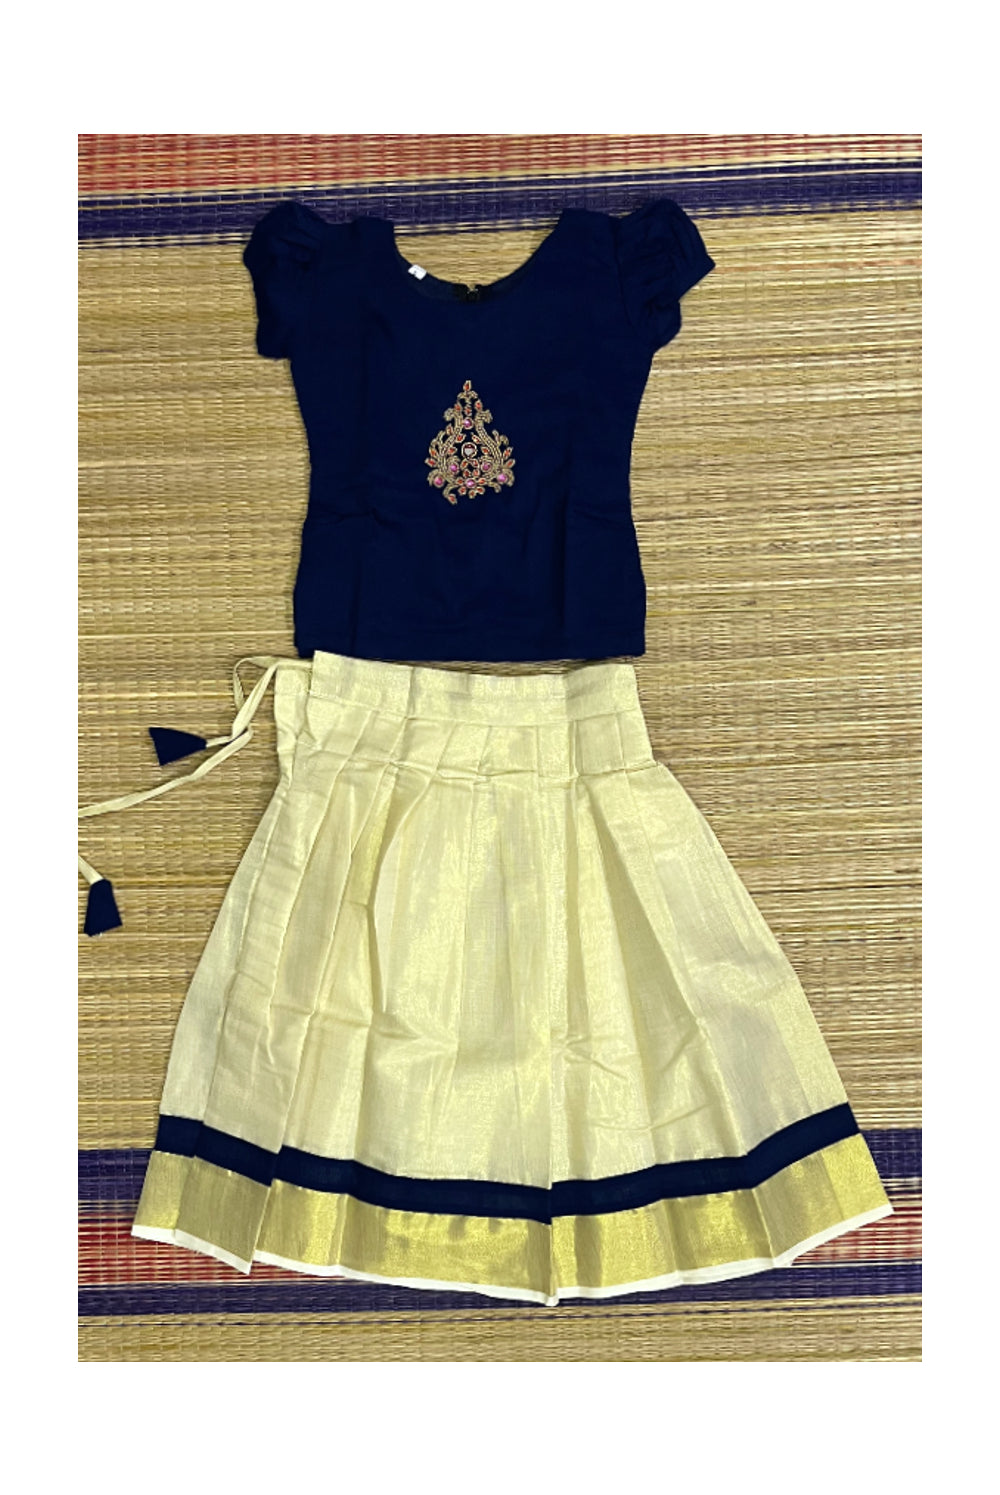 Southloom Kerala Pavada Blouse with Blue Bead Work Design (Age - 4 Year)